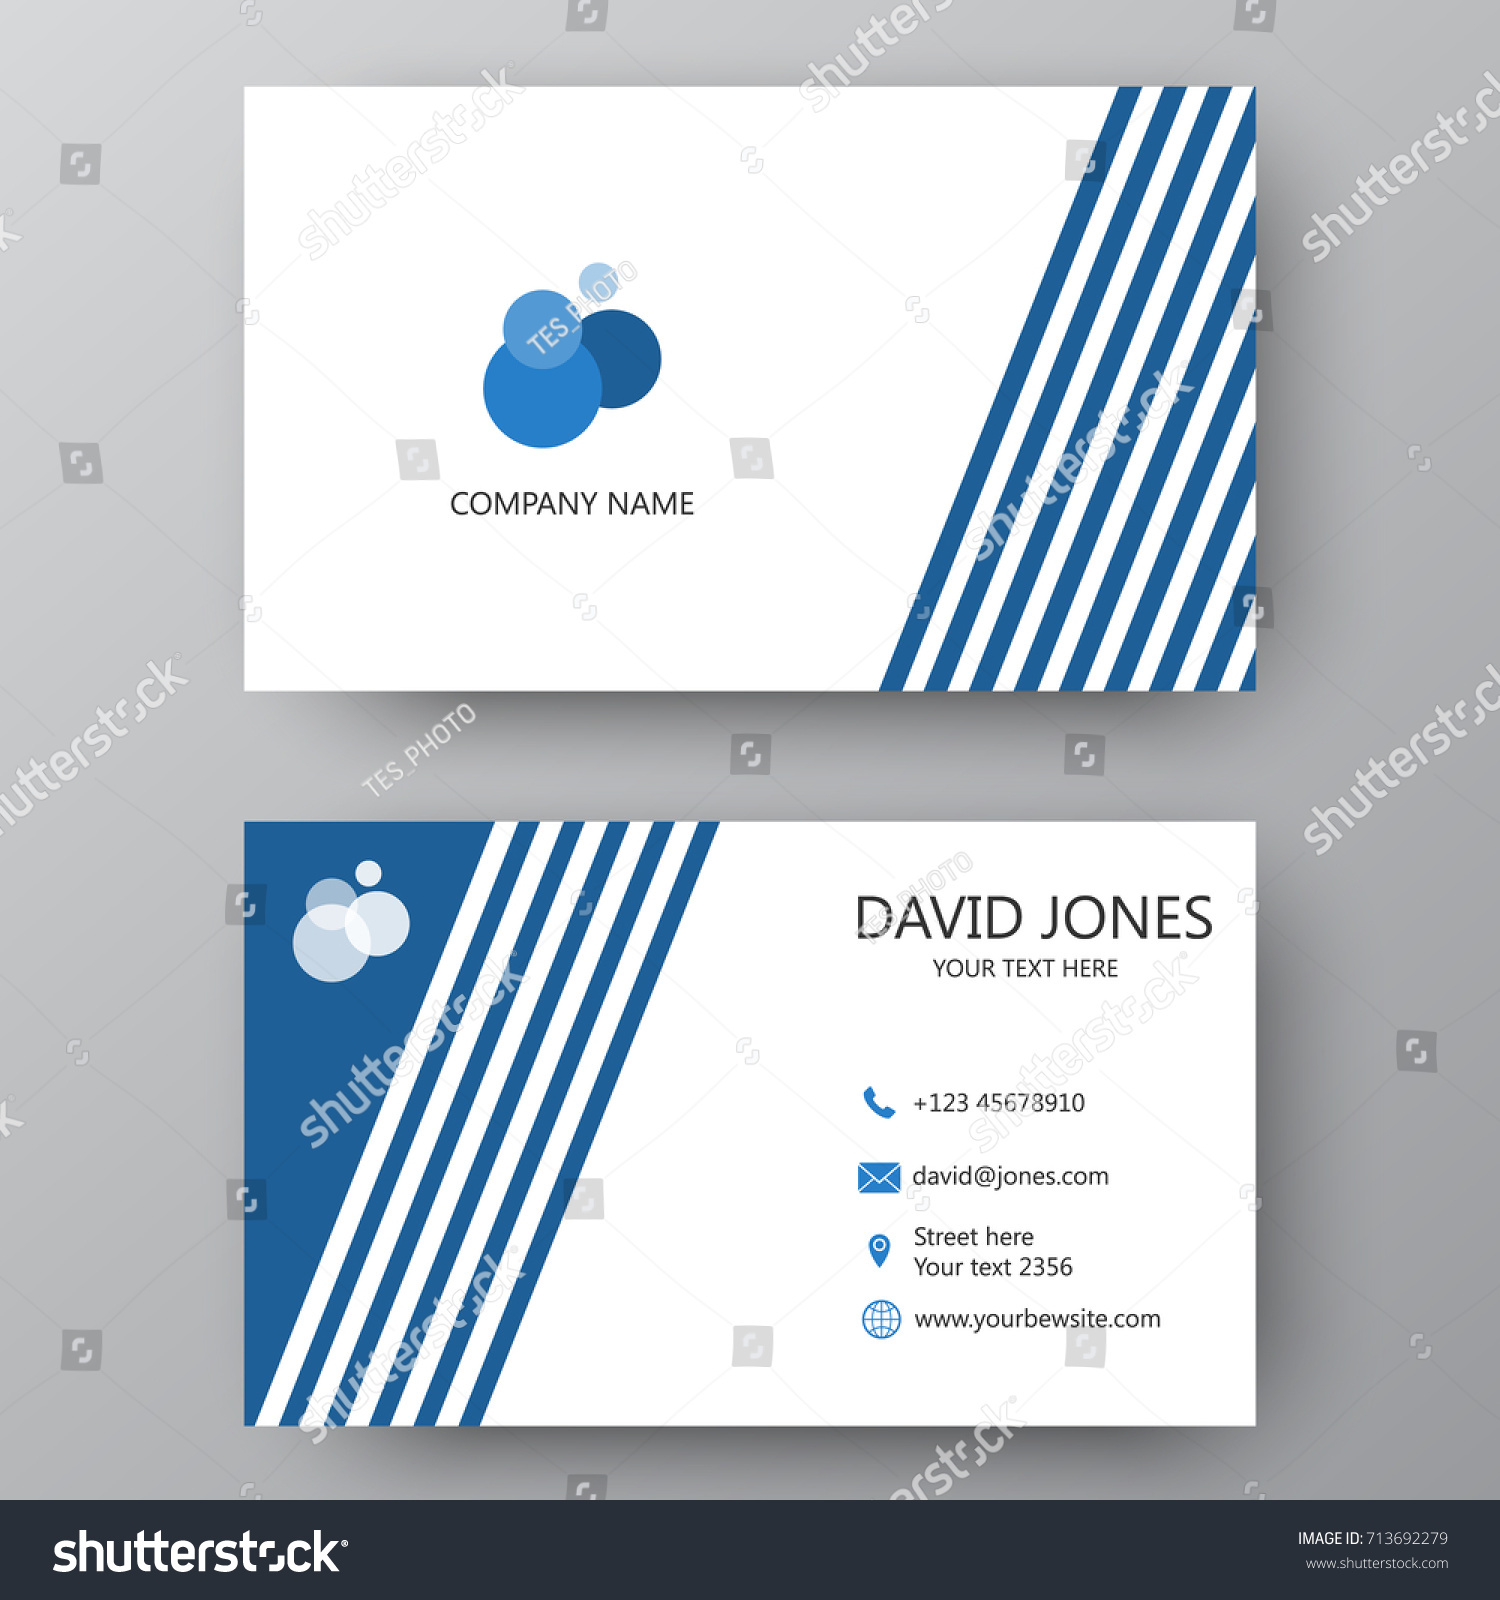 Vector Business Card Template Visiting Card Stock Vector Royalty Free 713692279